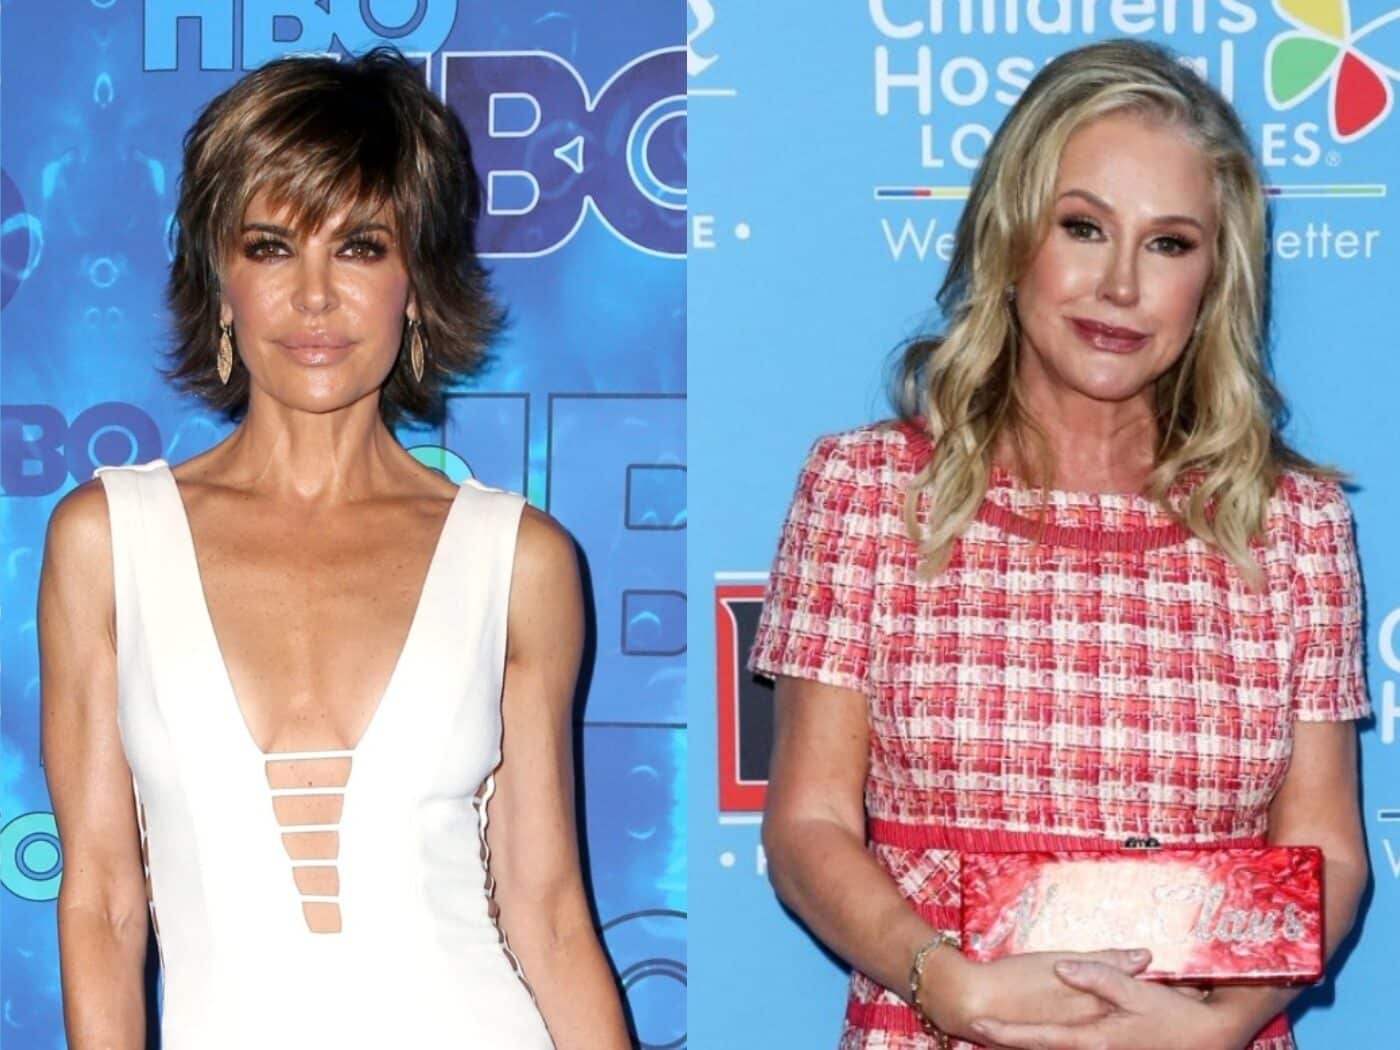 RHOBH's Lisa Rinna Reveals What Was Cut From Her Confrontation With Kathy Hilton, Claims Kathy "Lied" About Erika Jayne